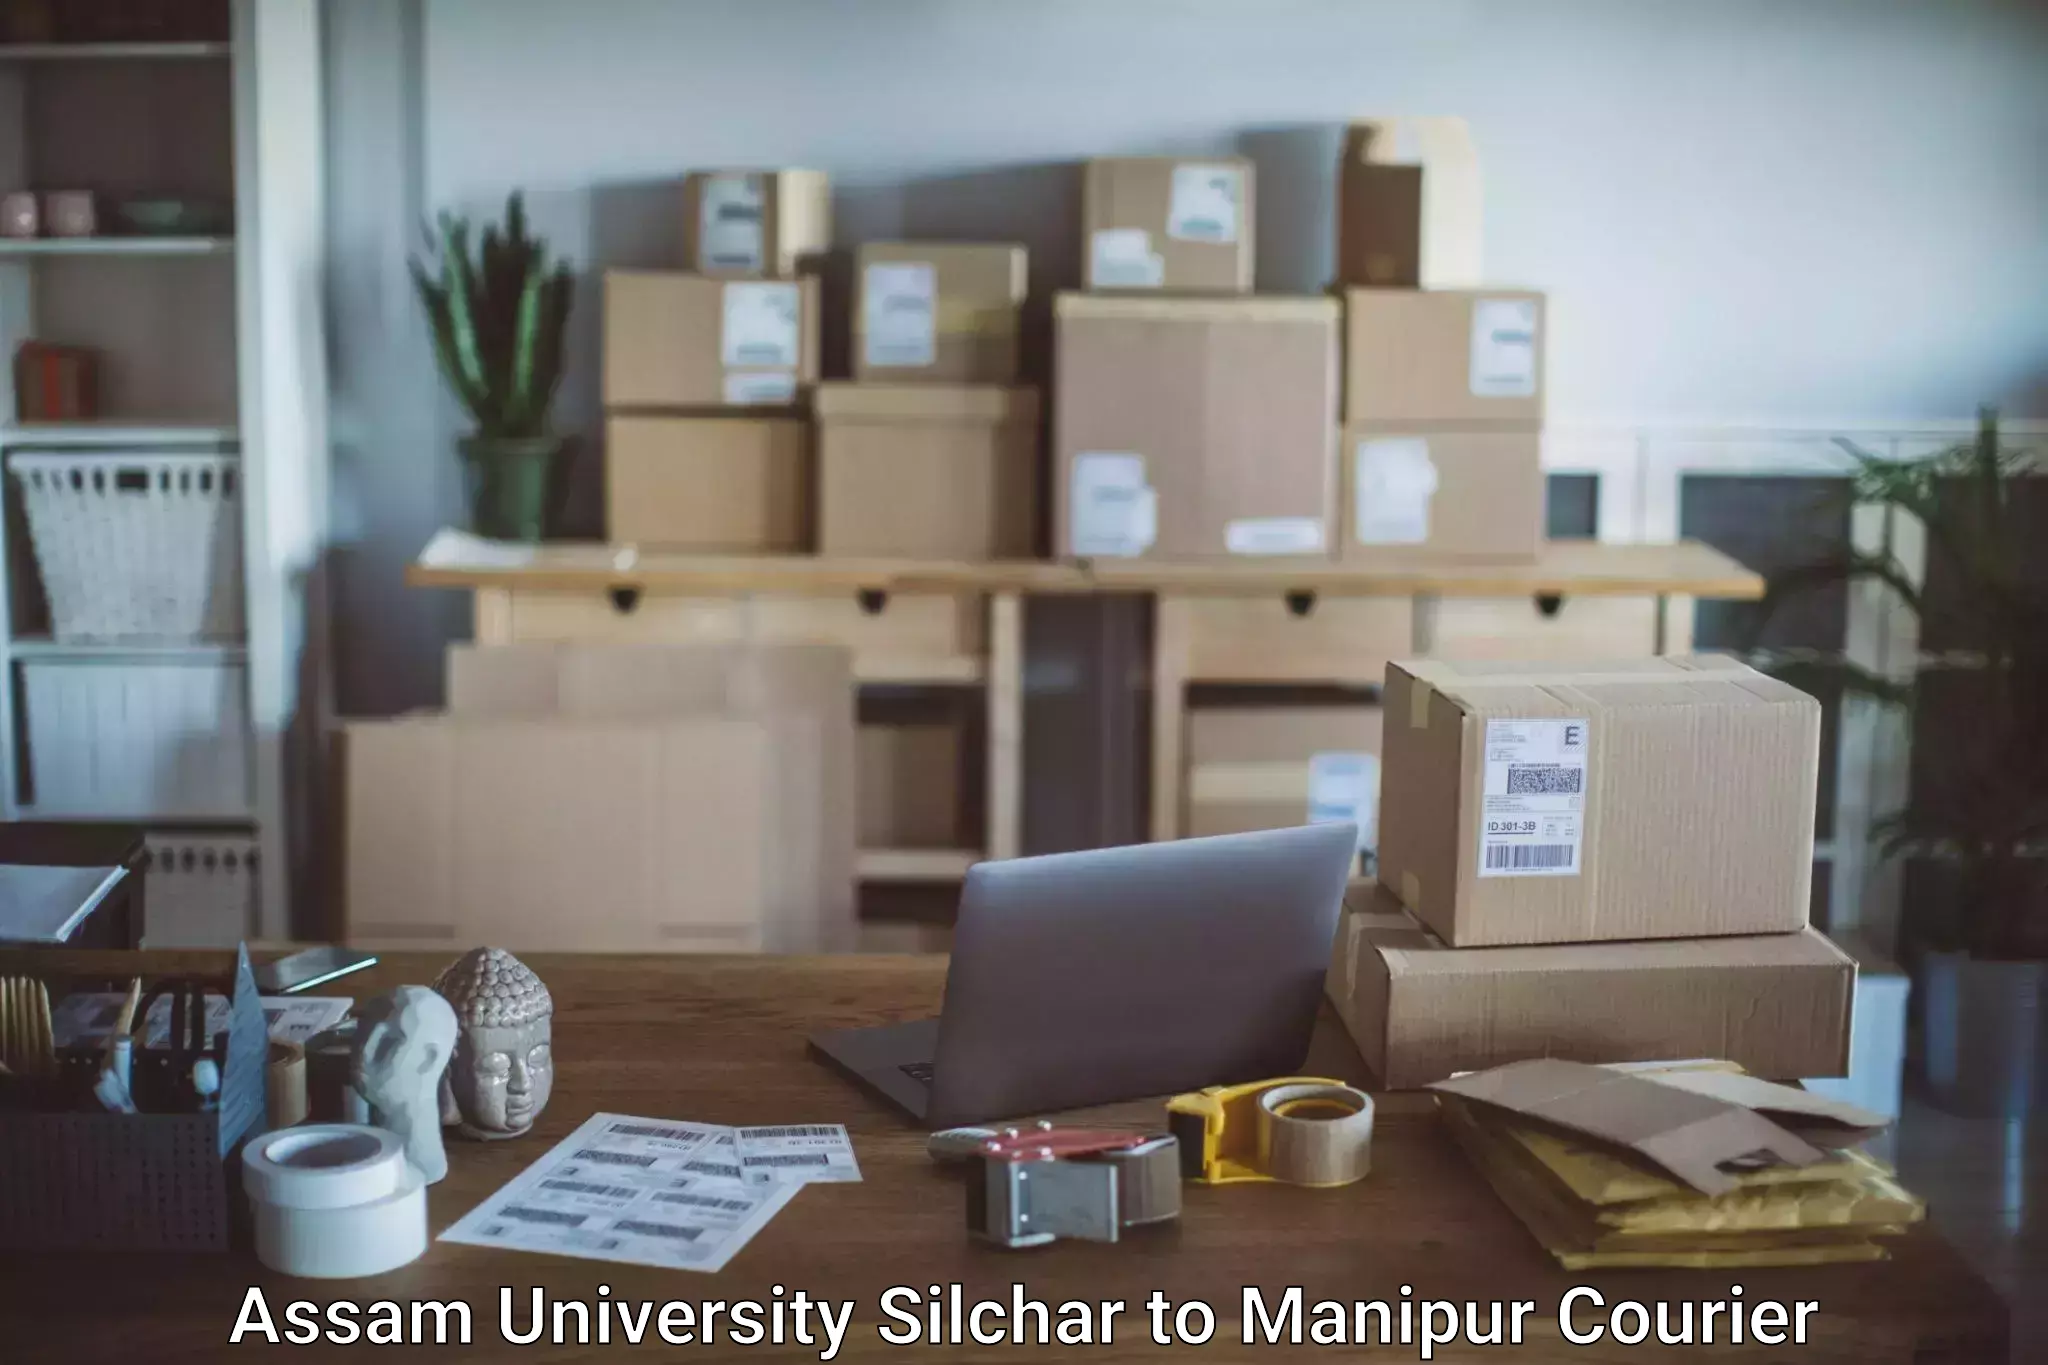 Express baggage shipping Assam University Silchar to Imphal